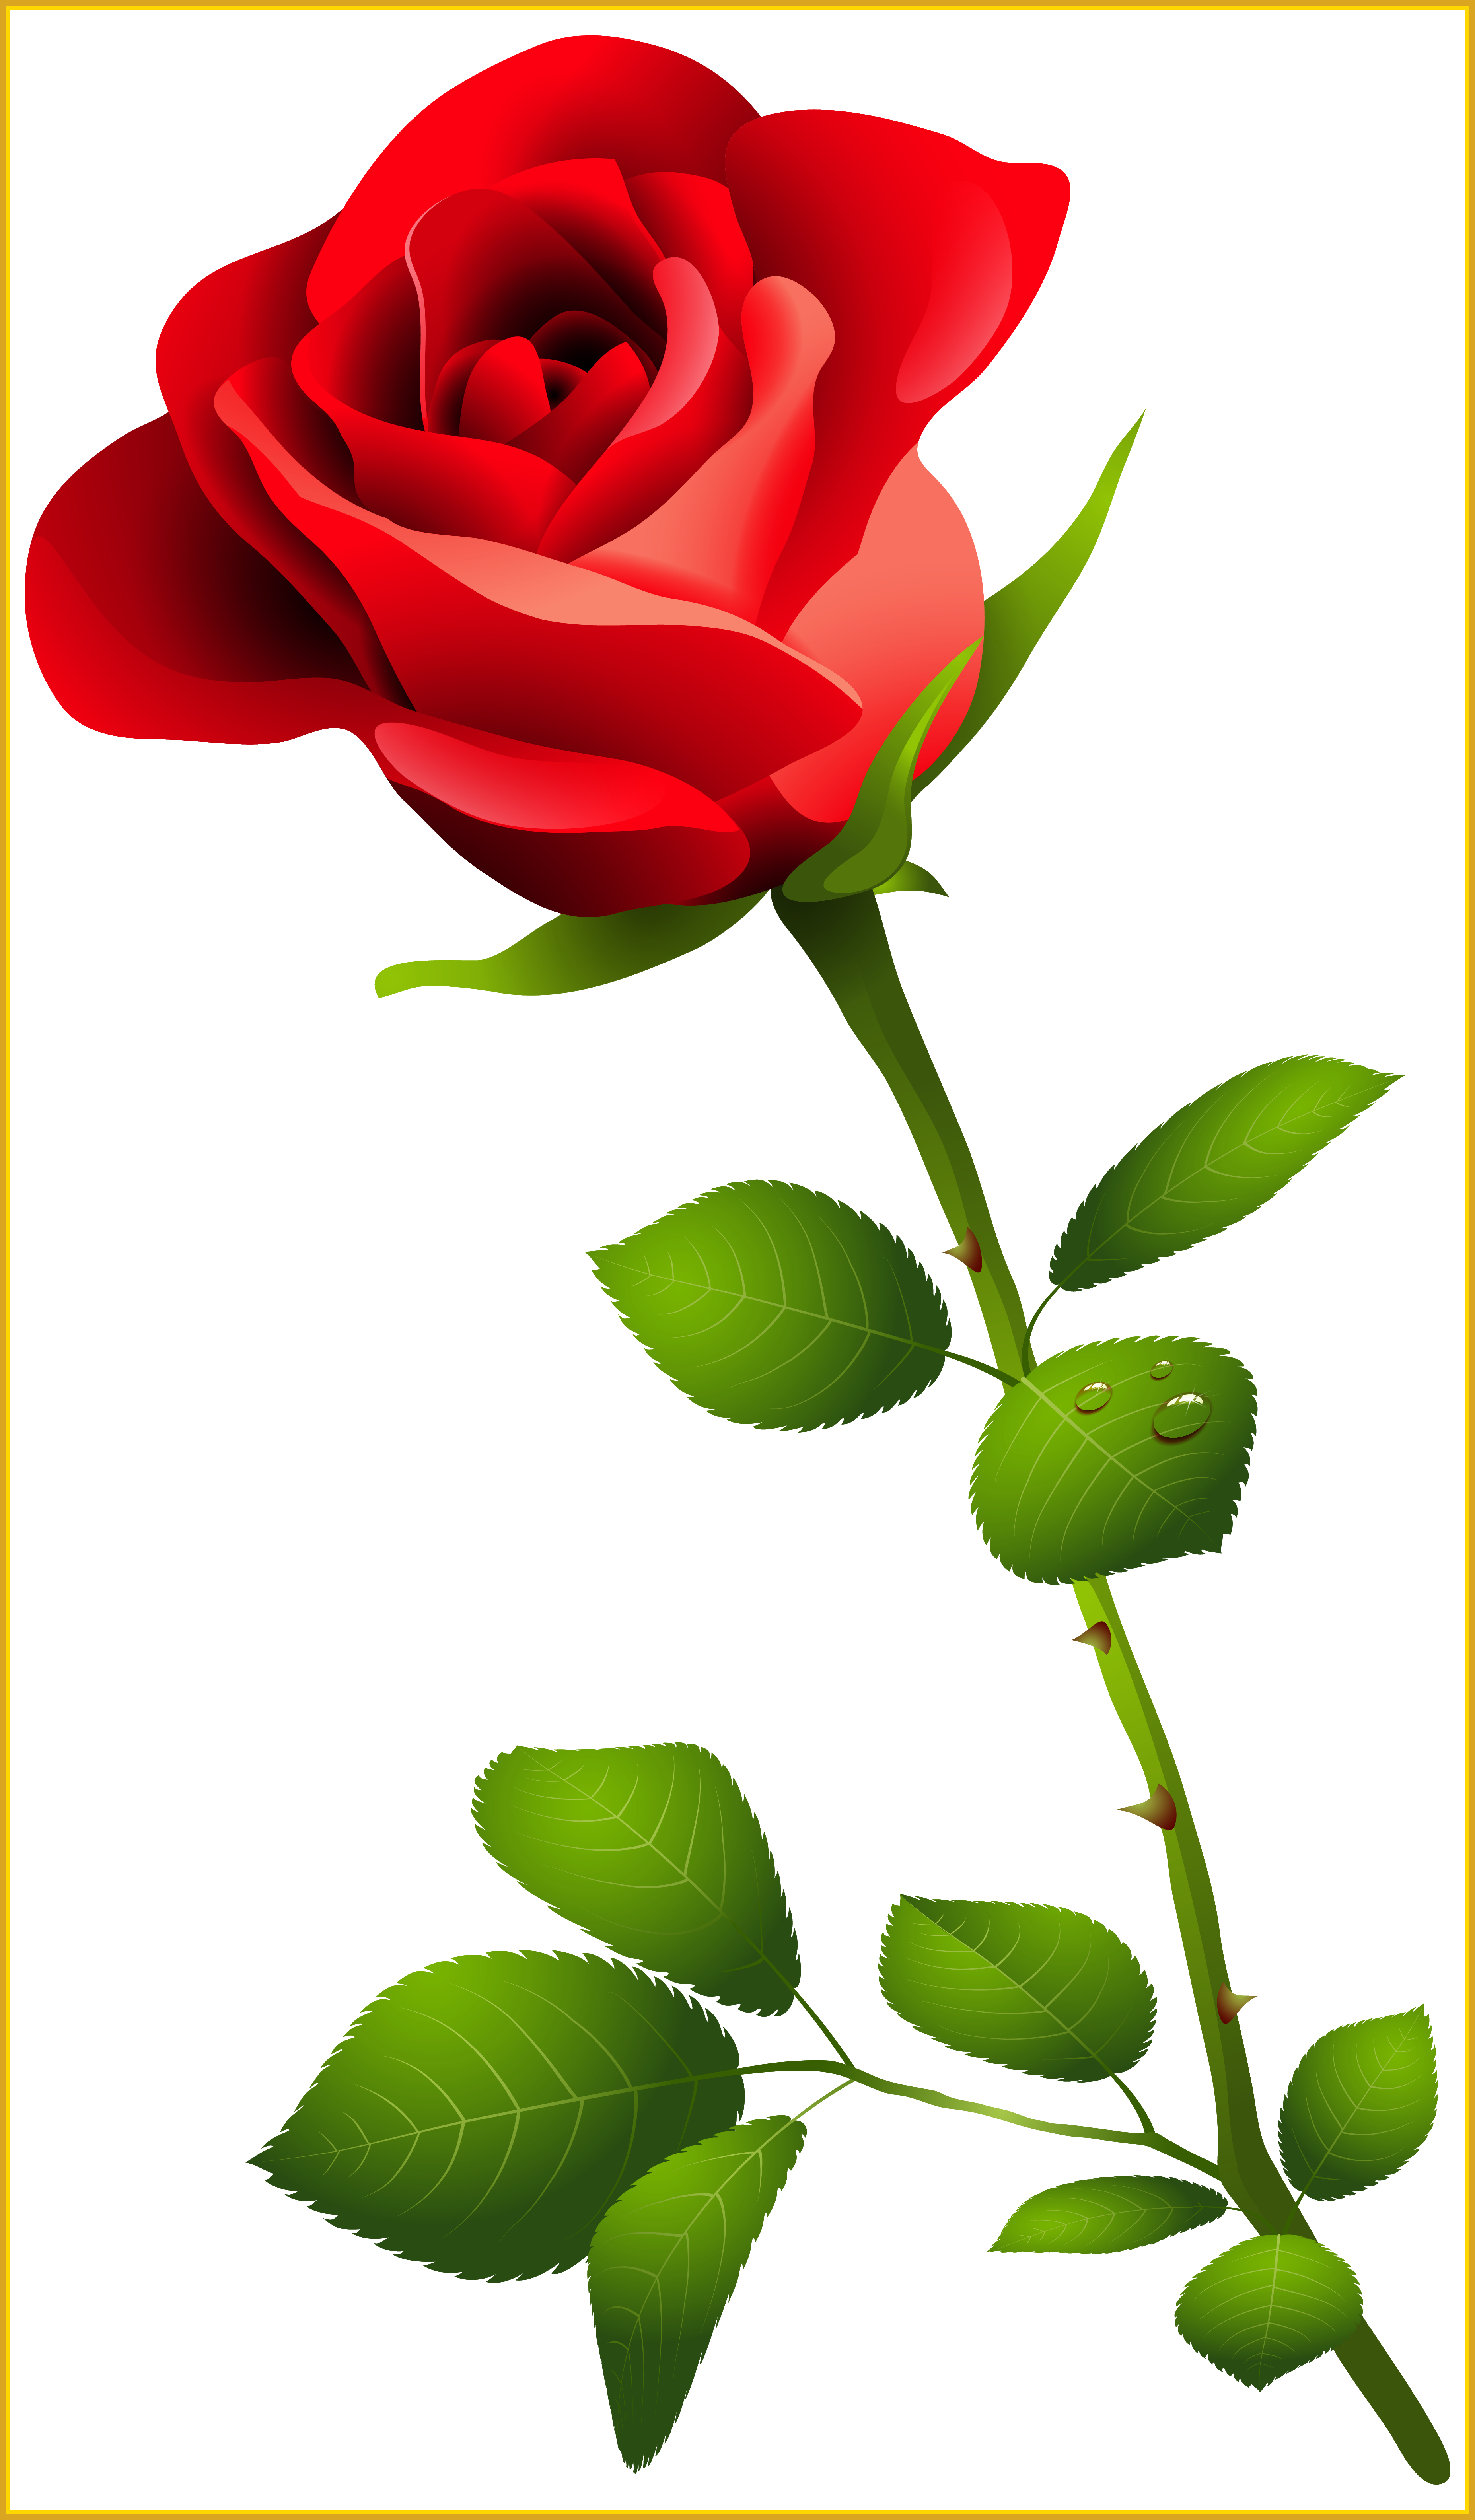 Awesome Red Rose With Stem Png Clipart Image Transparent - Awesome Red Rose With Stem Png Clipart Image Transparent (3708x6336)